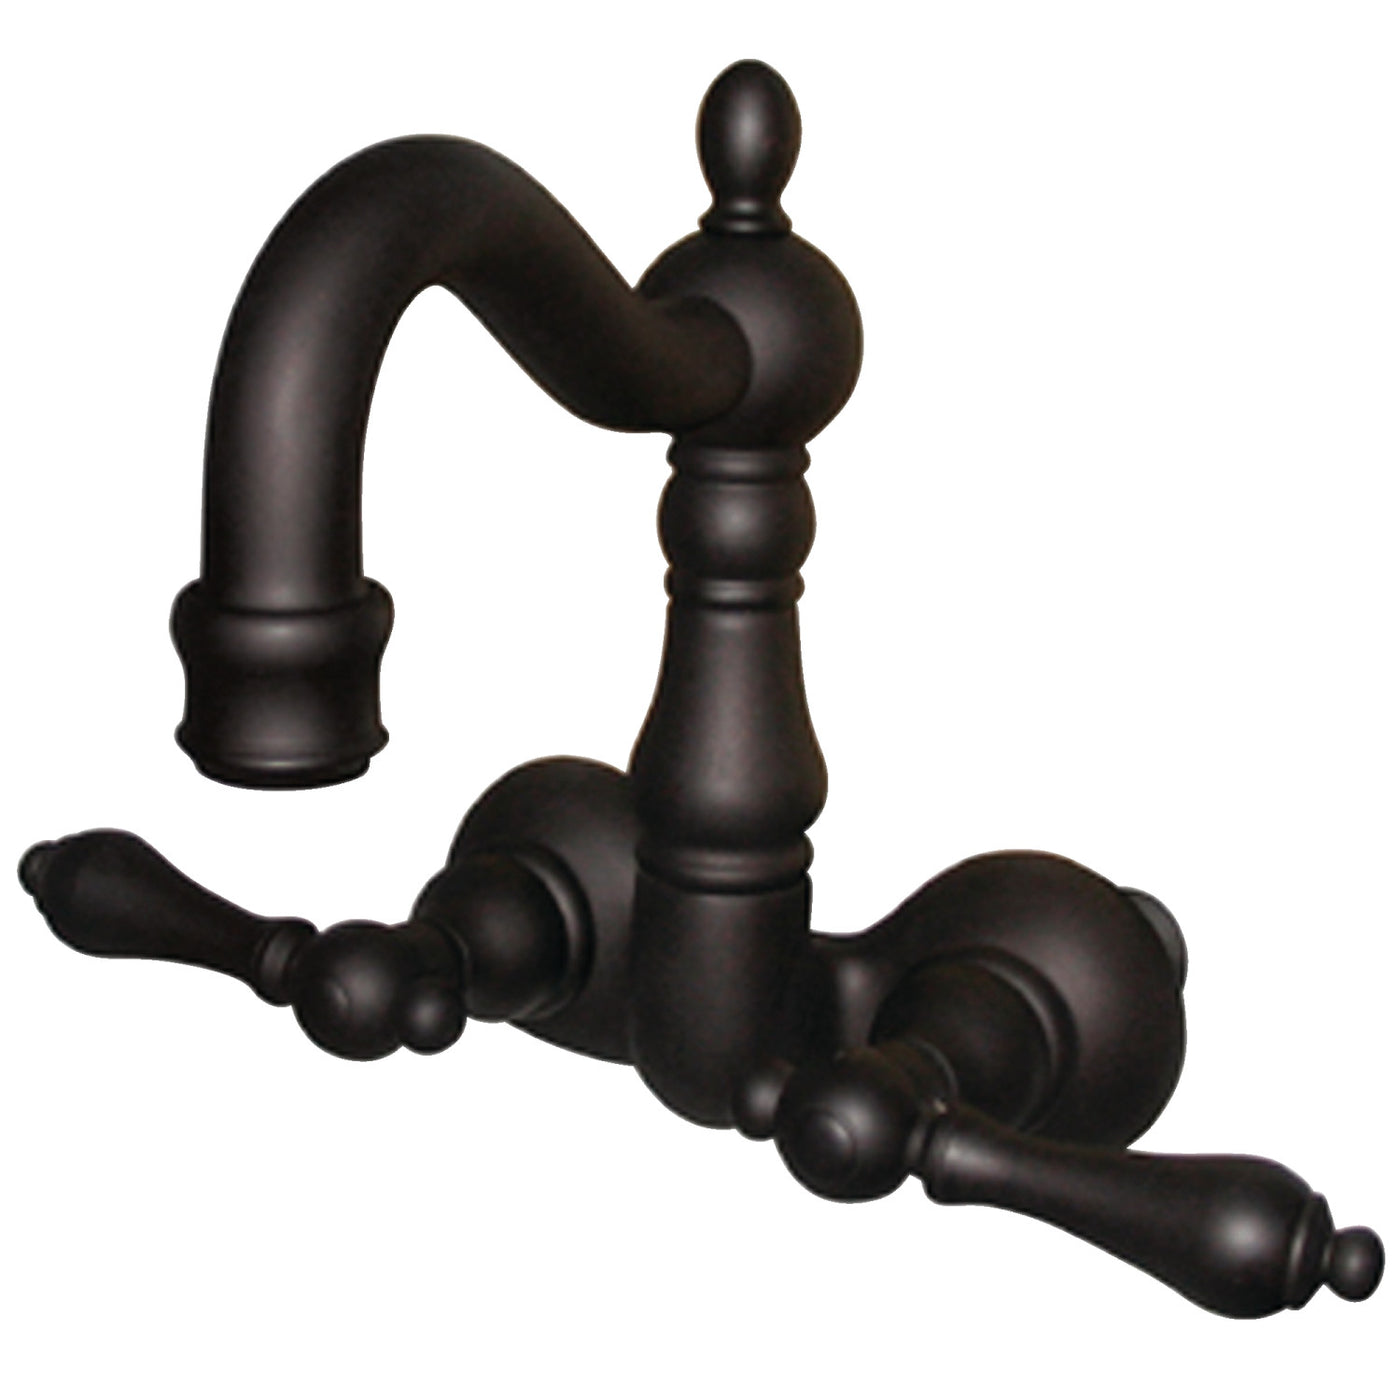 Elements of Design DT10715AL 3-3/8-Inch Wall Mount Tub Faucet, Oil Rubbed Bronze